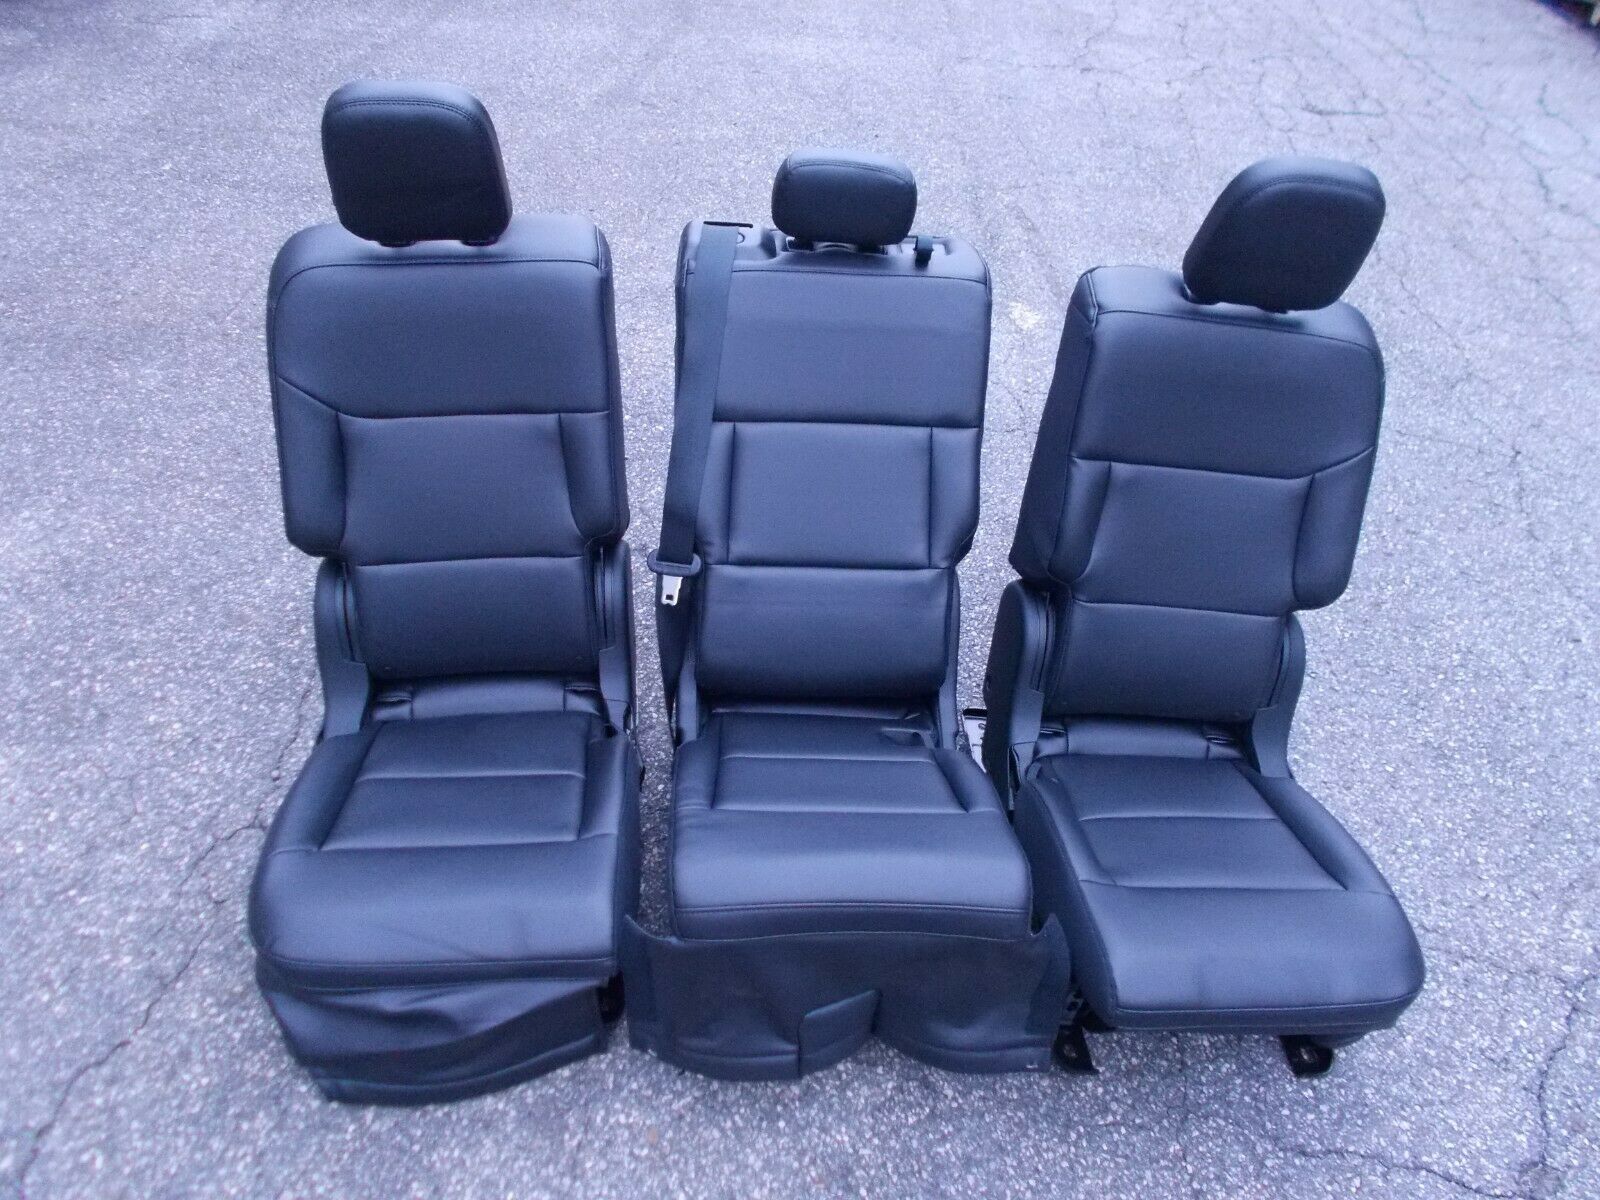 New Takeout Middle Seat 2nd Row Black Bench Ford Explorer 2020 2021